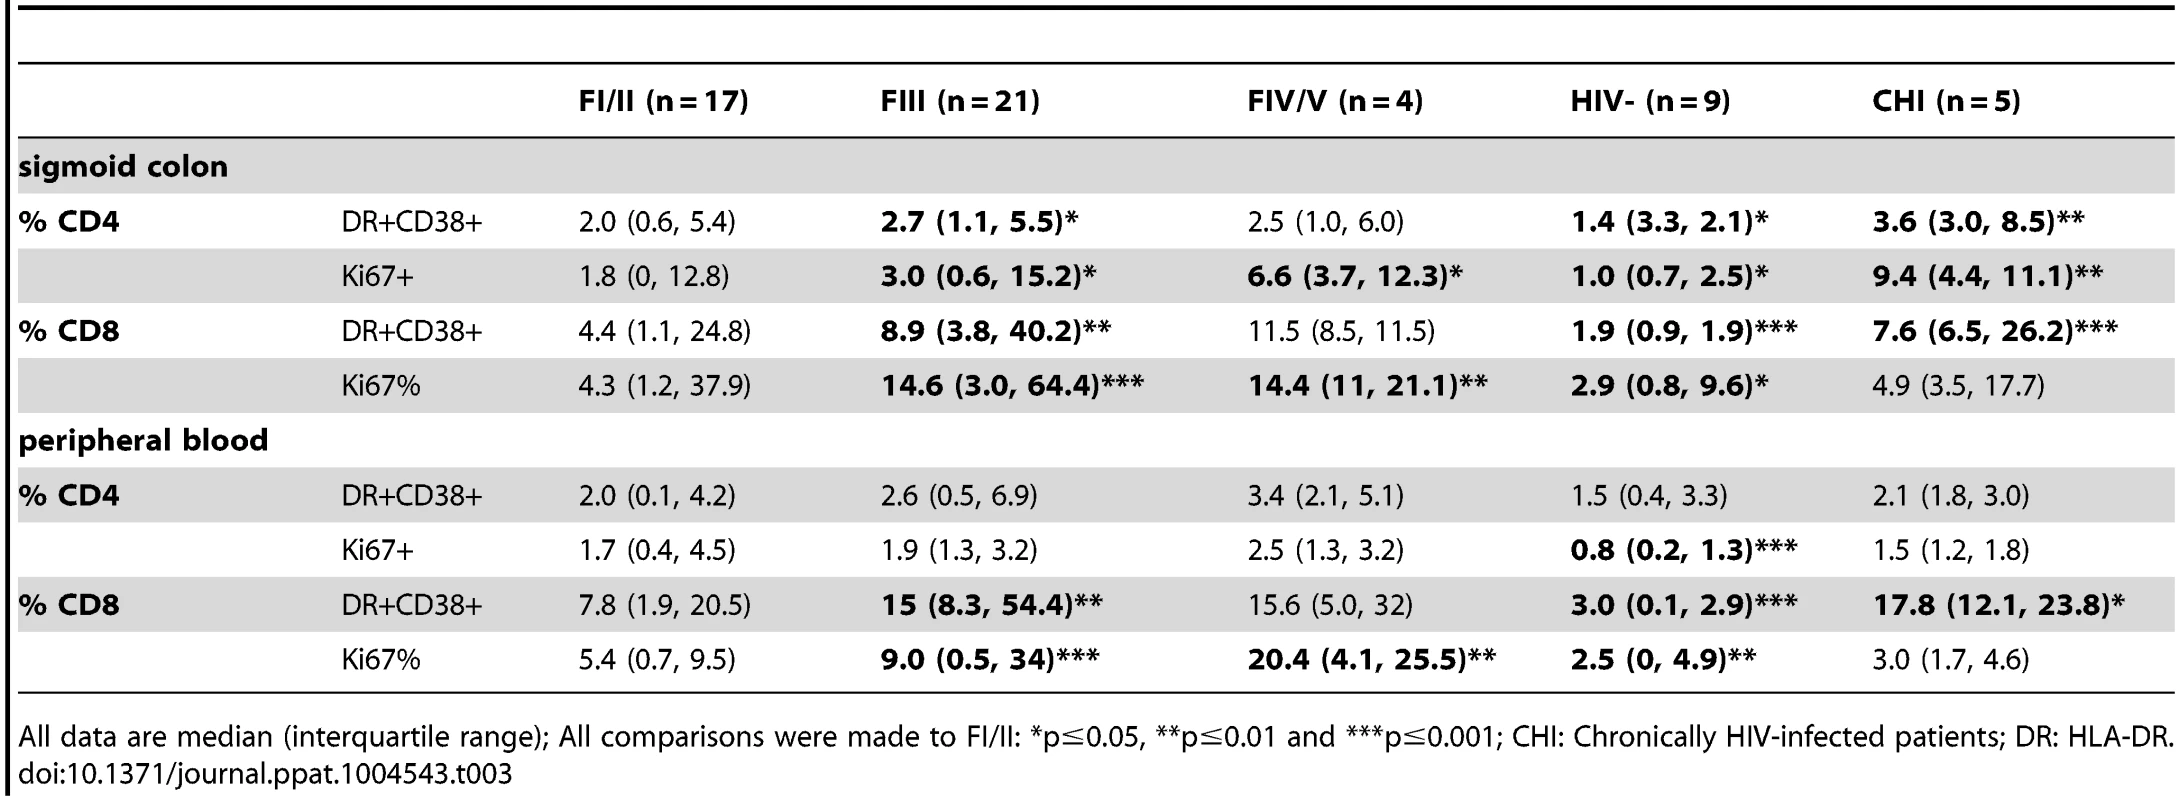 Percentage of activated (HLA-DR+CD38+) and cycling (Ki67+) CD4+ and CD8+ T cells in sigmoid colon and peripheral blood at baseline in HIV-, FI/II, FIII, FIV/V and CHI subjects.